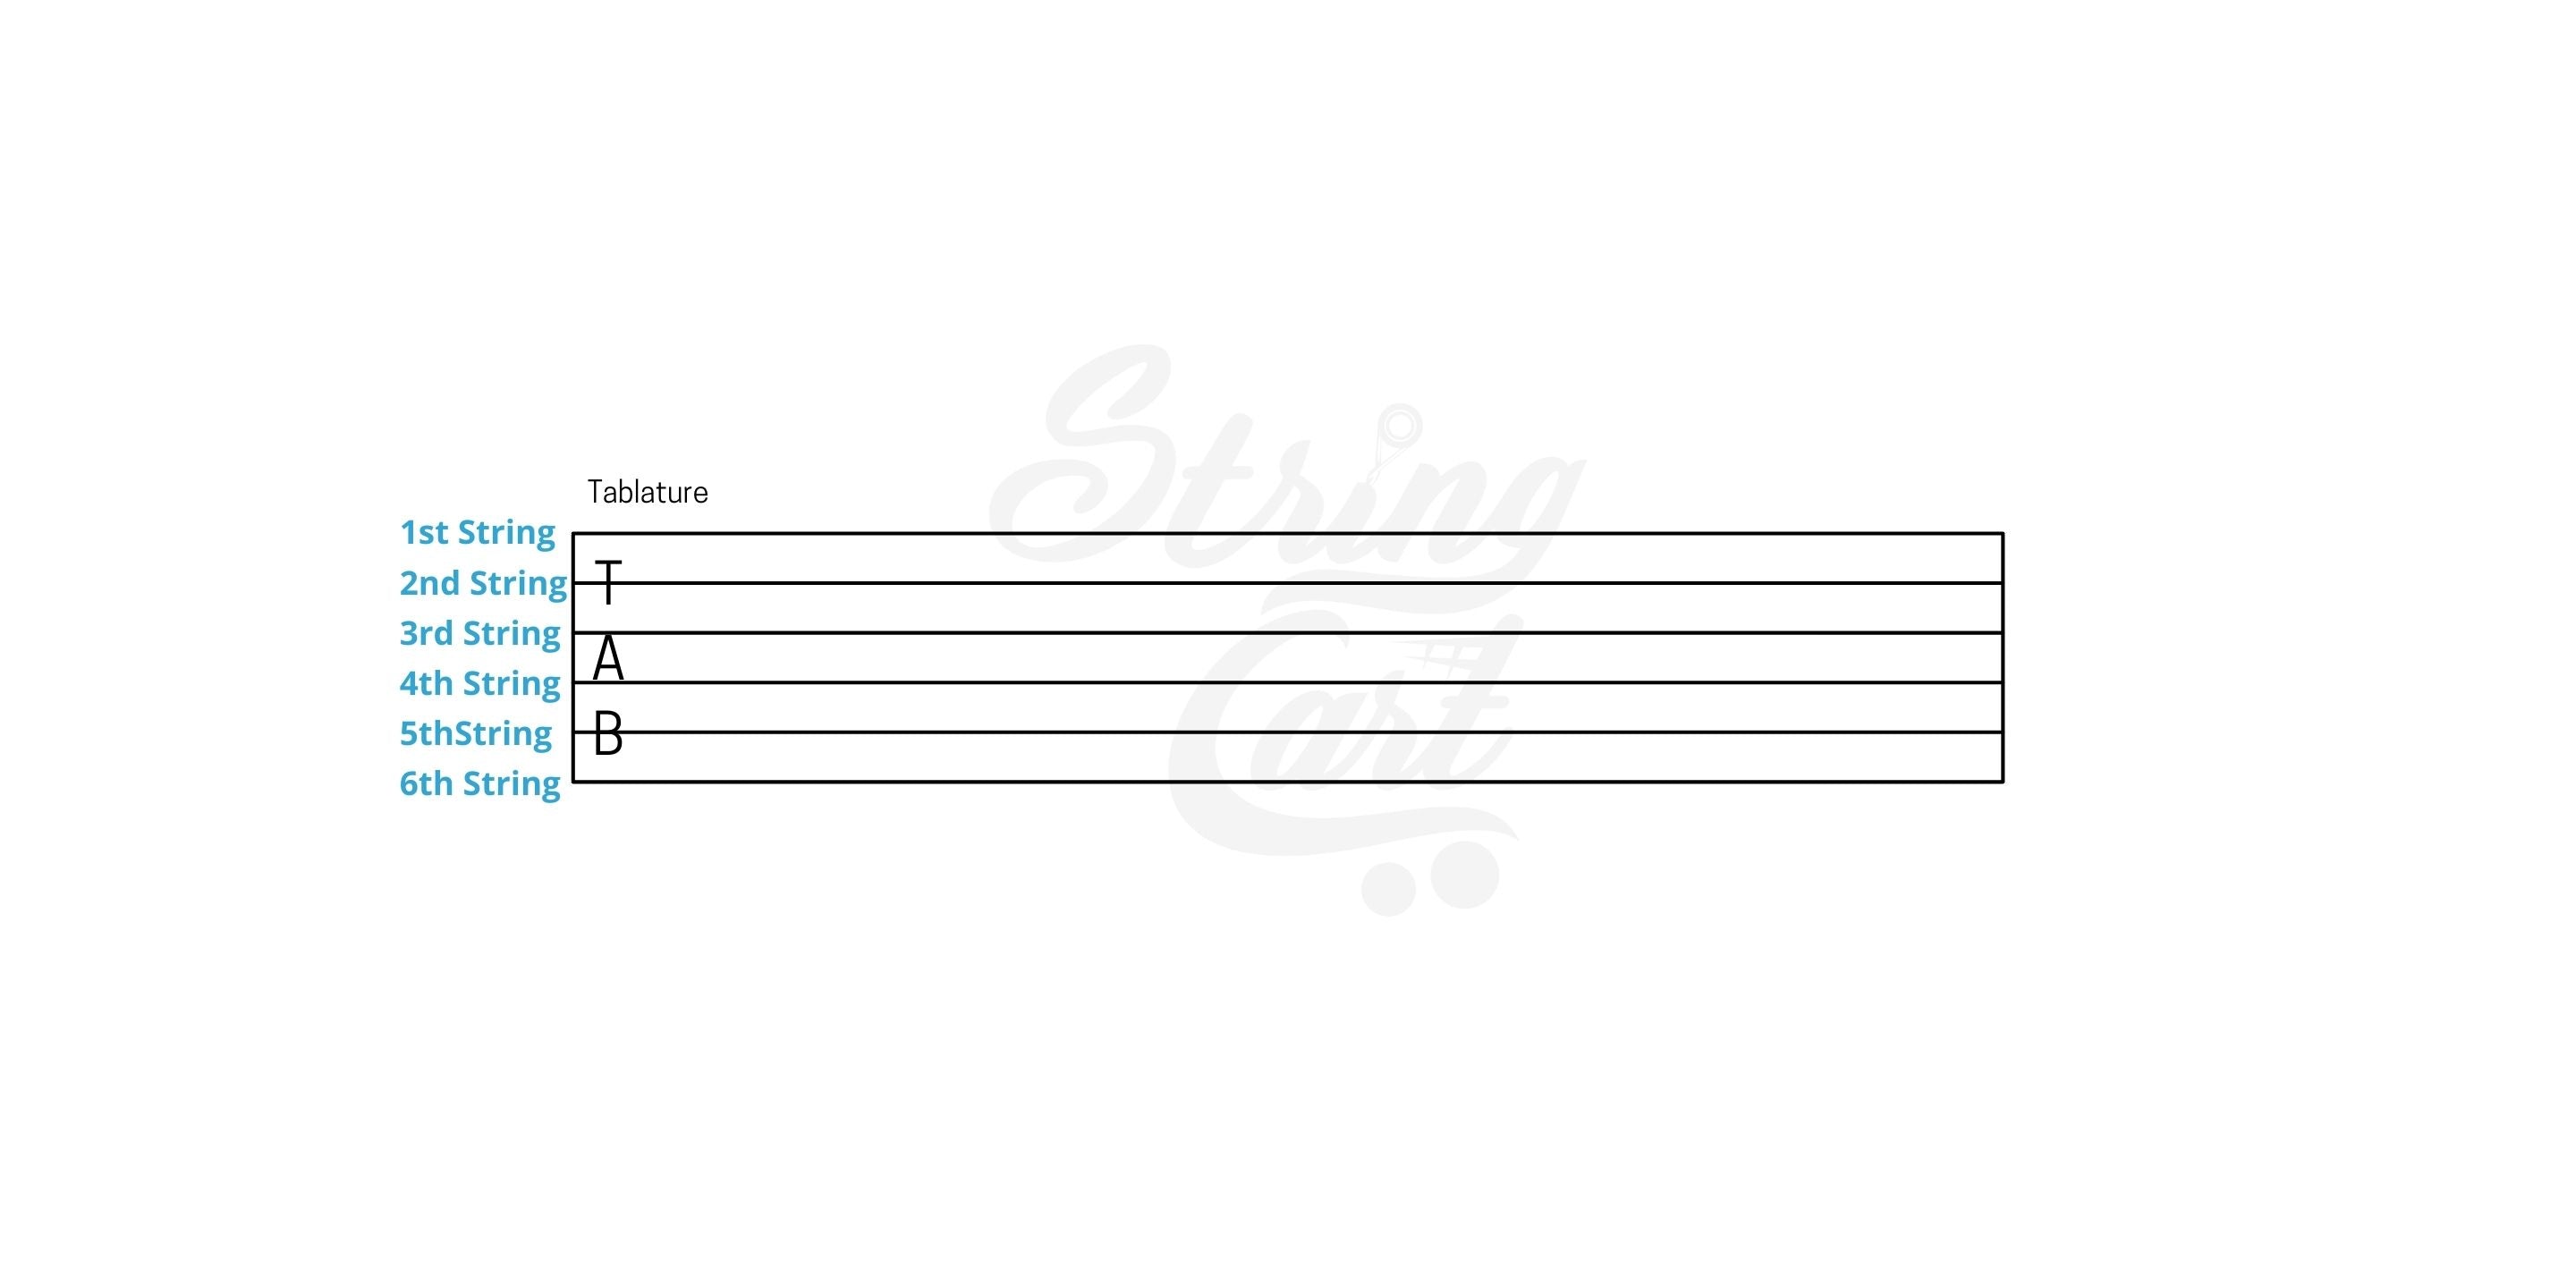 How Strings Are Numbered In Guitar Tabs